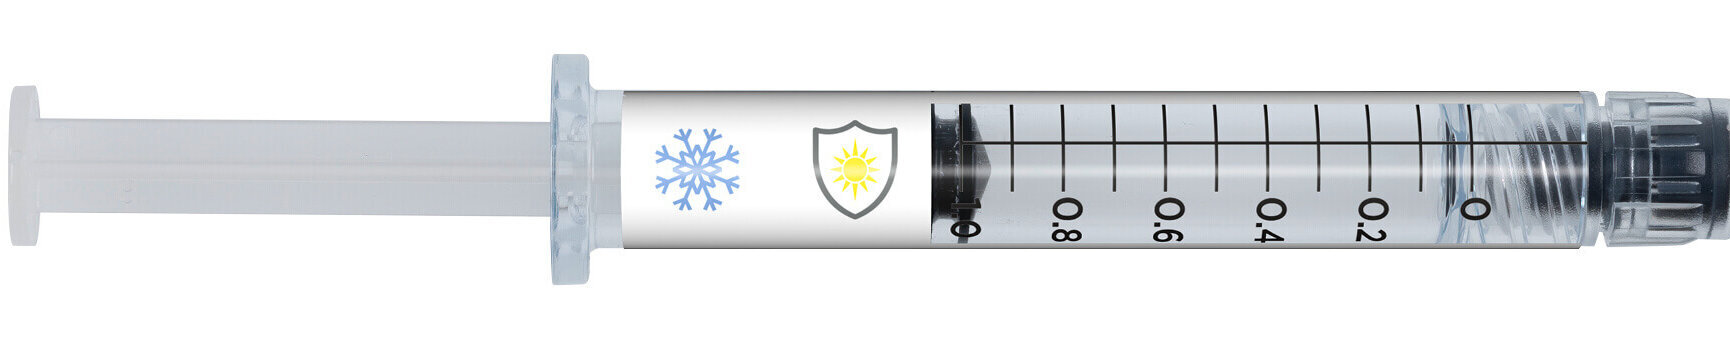 Freeze-Light-Protect 1 protects the API in the syringe against UV light.